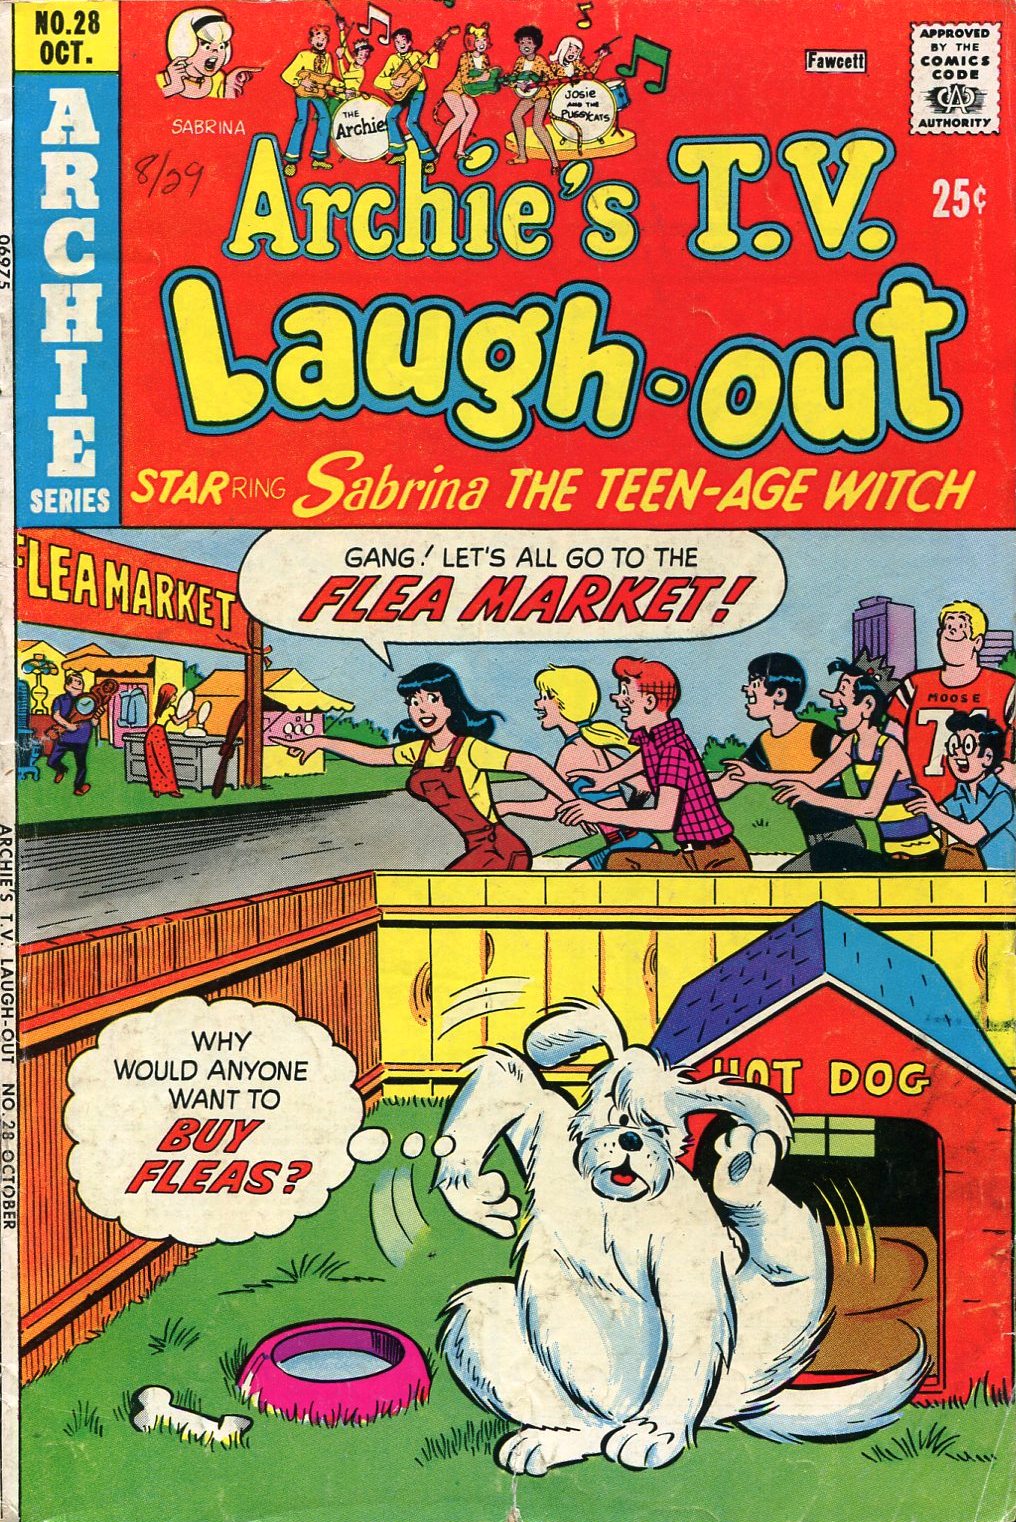 Read online Archie's TV Laugh-Out comic -  Issue #28 - 1